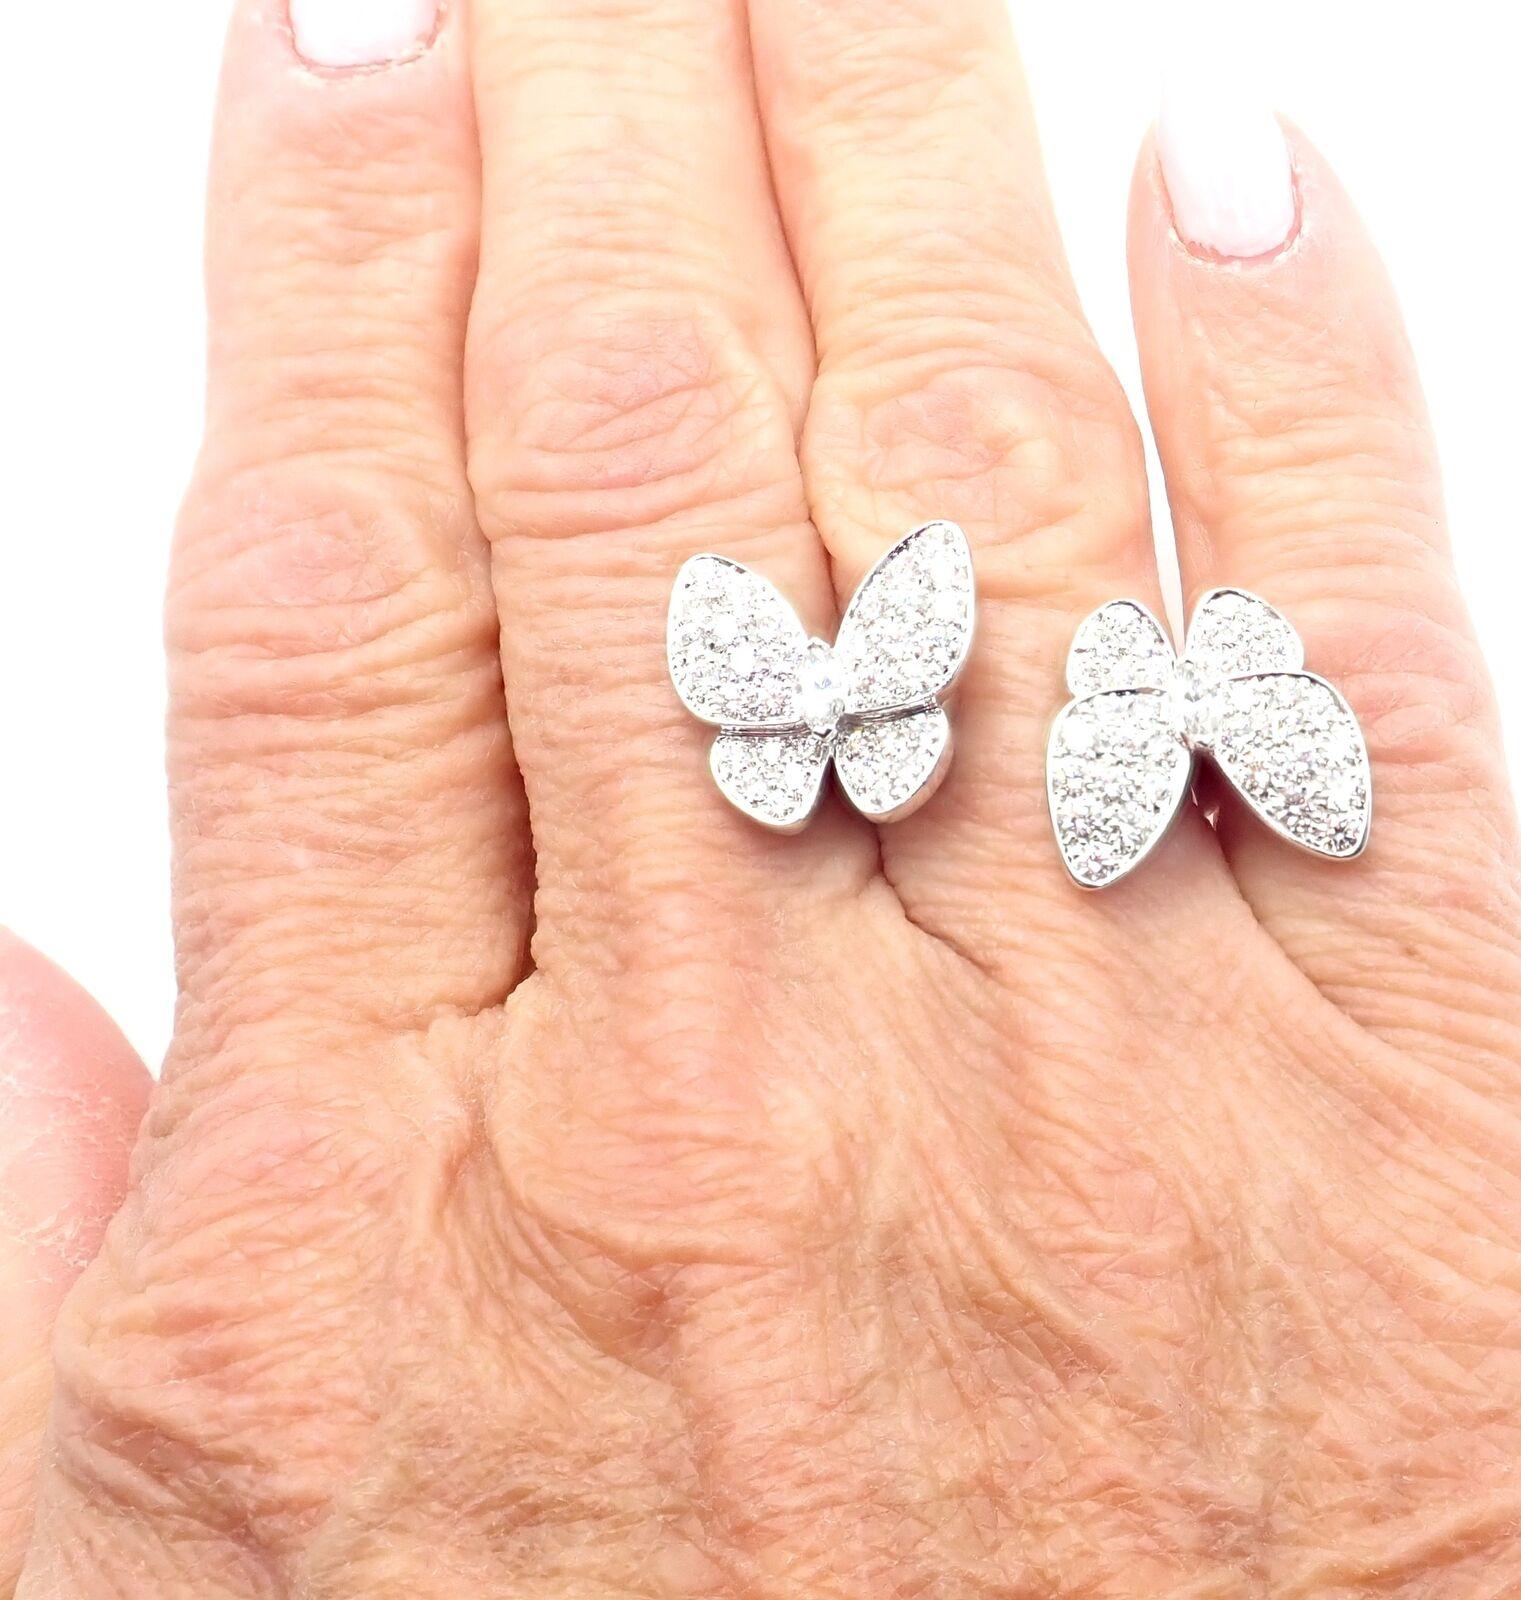 Van Cleef & Arpels Diamond Two Butterfly Between Finger White Gold Ring In Excellent Condition For Sale In Holland, PA